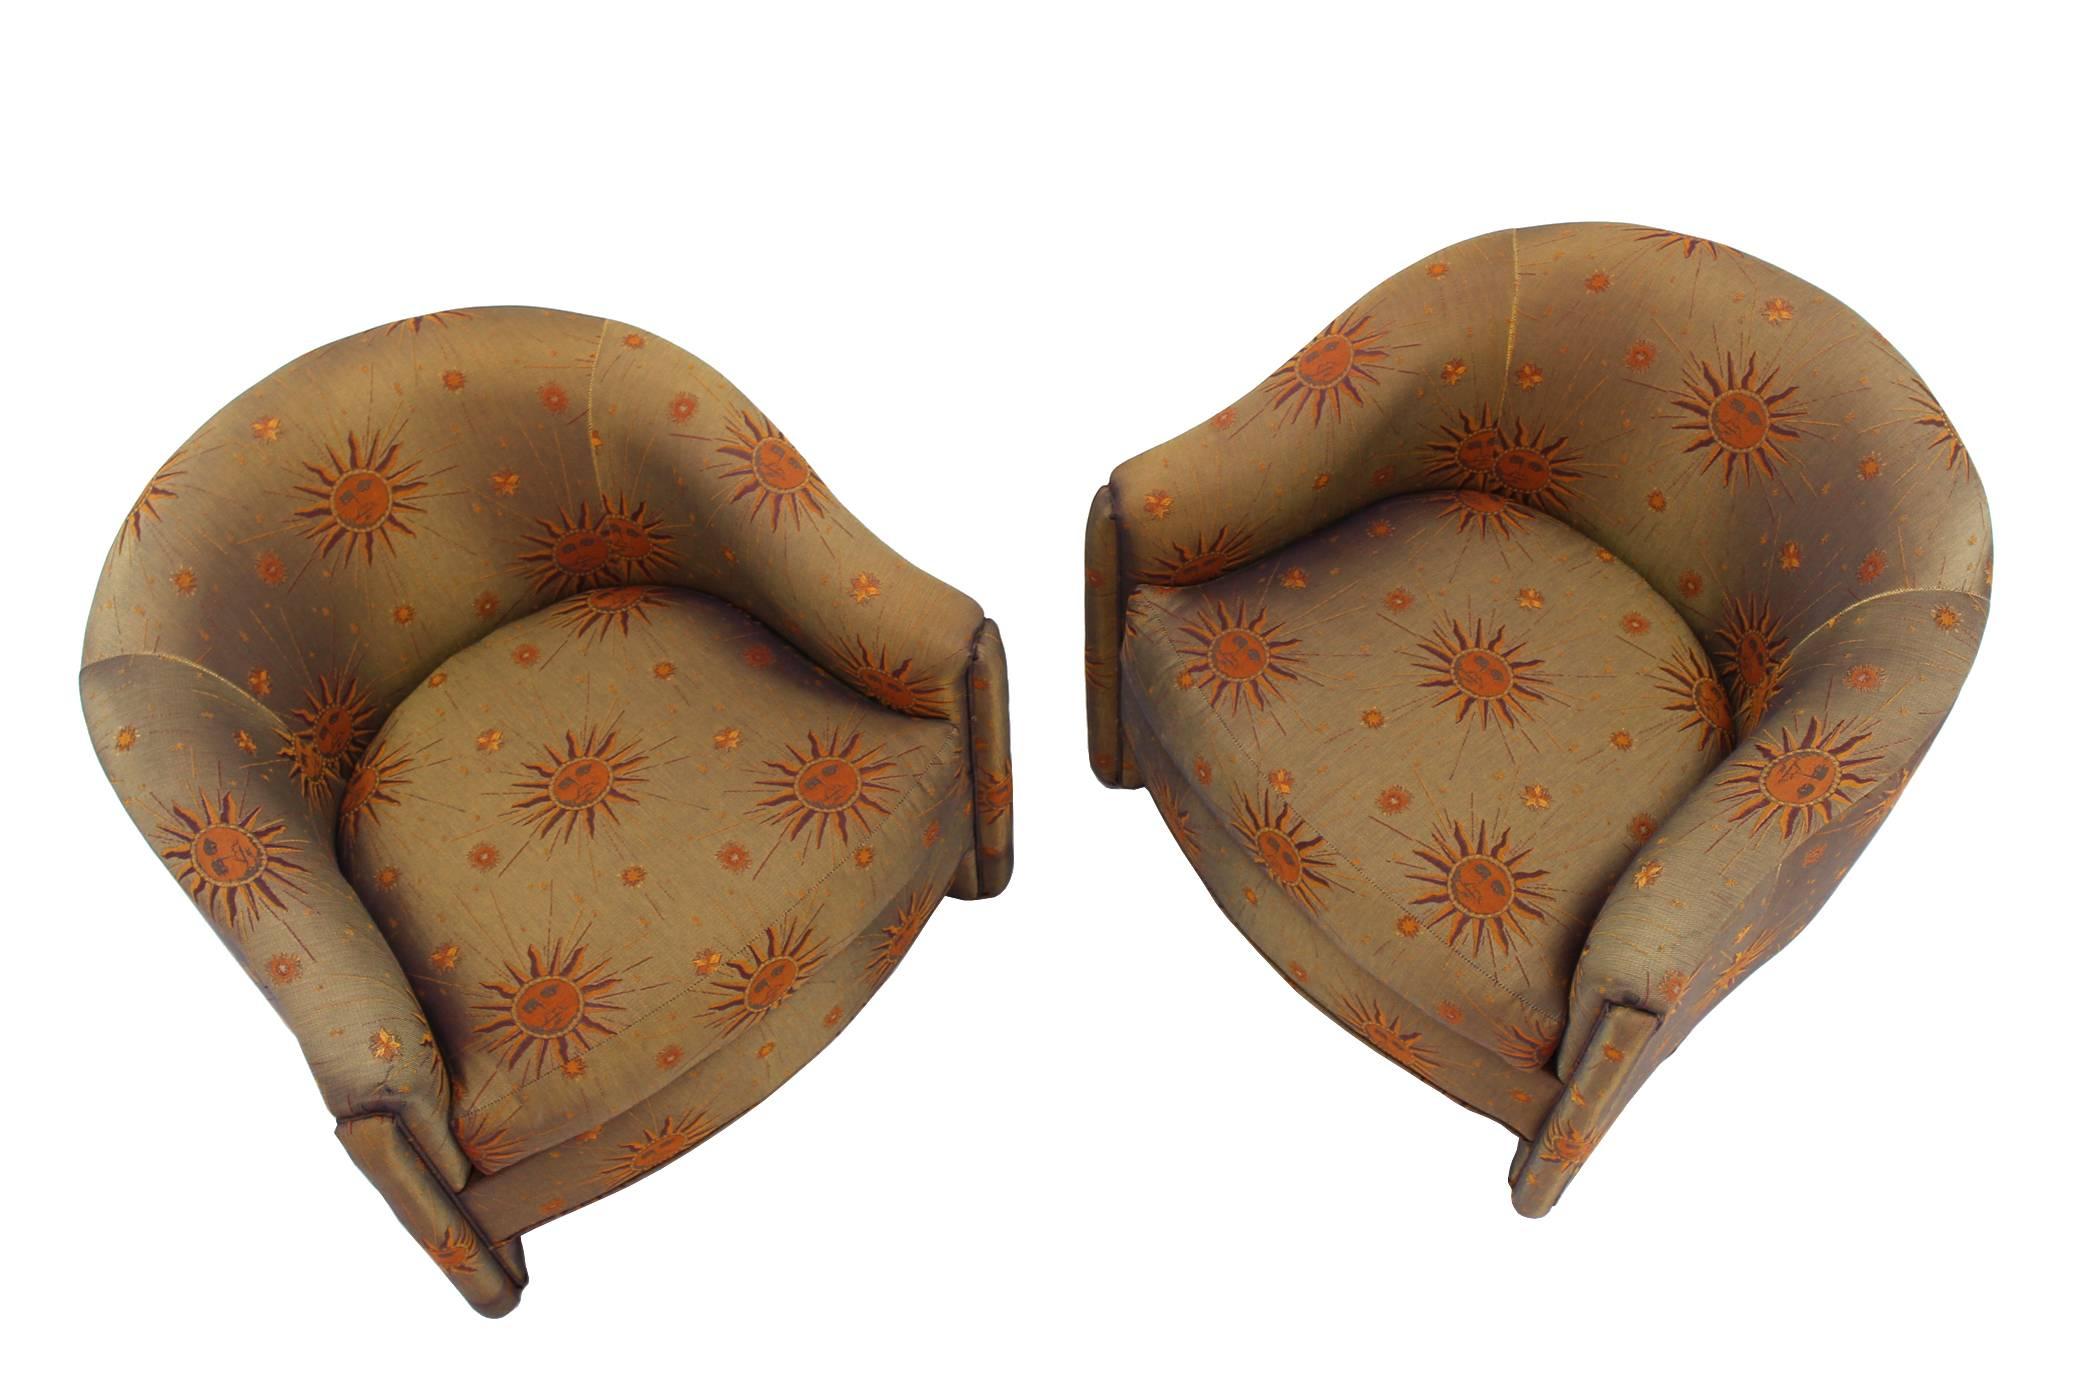 Pair of Barrel Back Mid-Century Modern Lounge Chairs In Excellent Condition For Sale In Rockaway, NJ